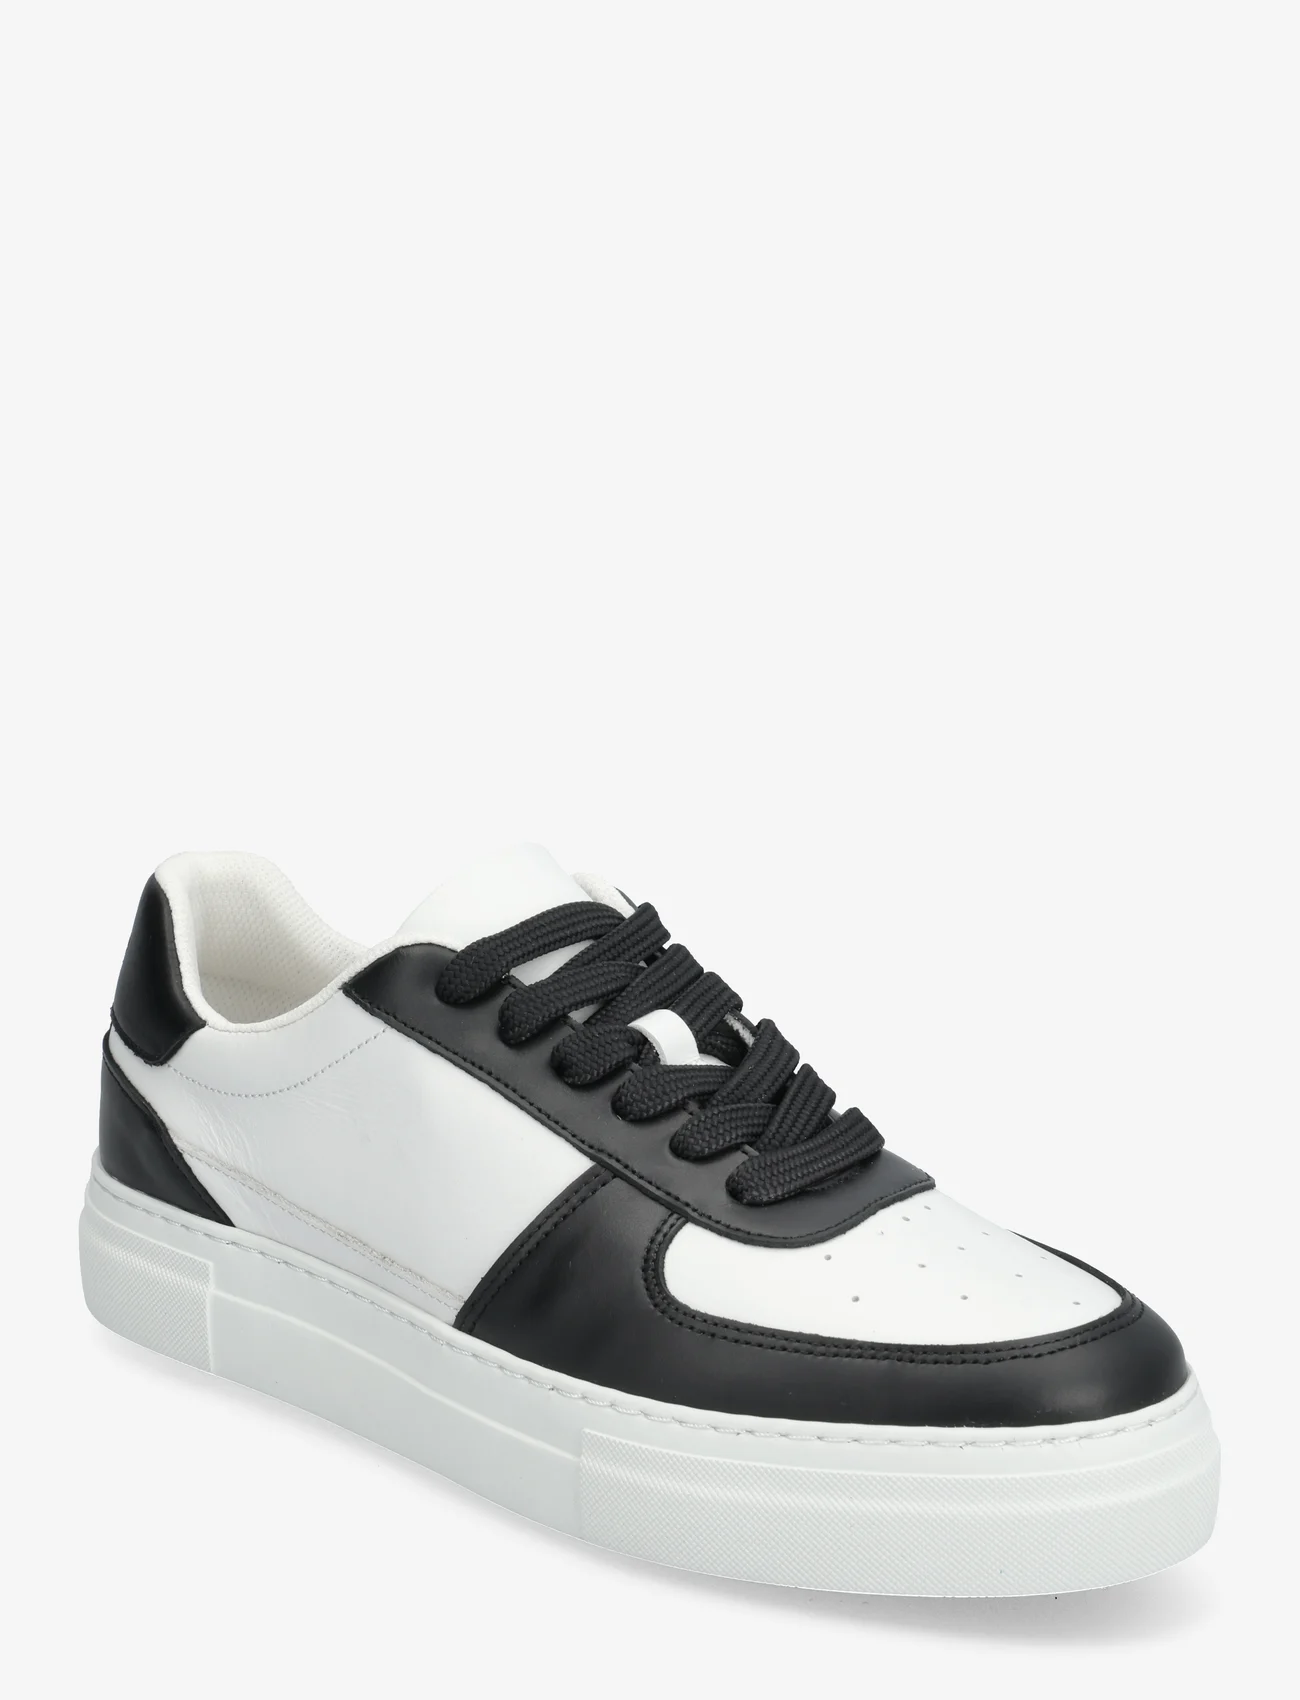 Selected Homme - SLHHARALD LEATHER SNEAKER - low tops - black - 0